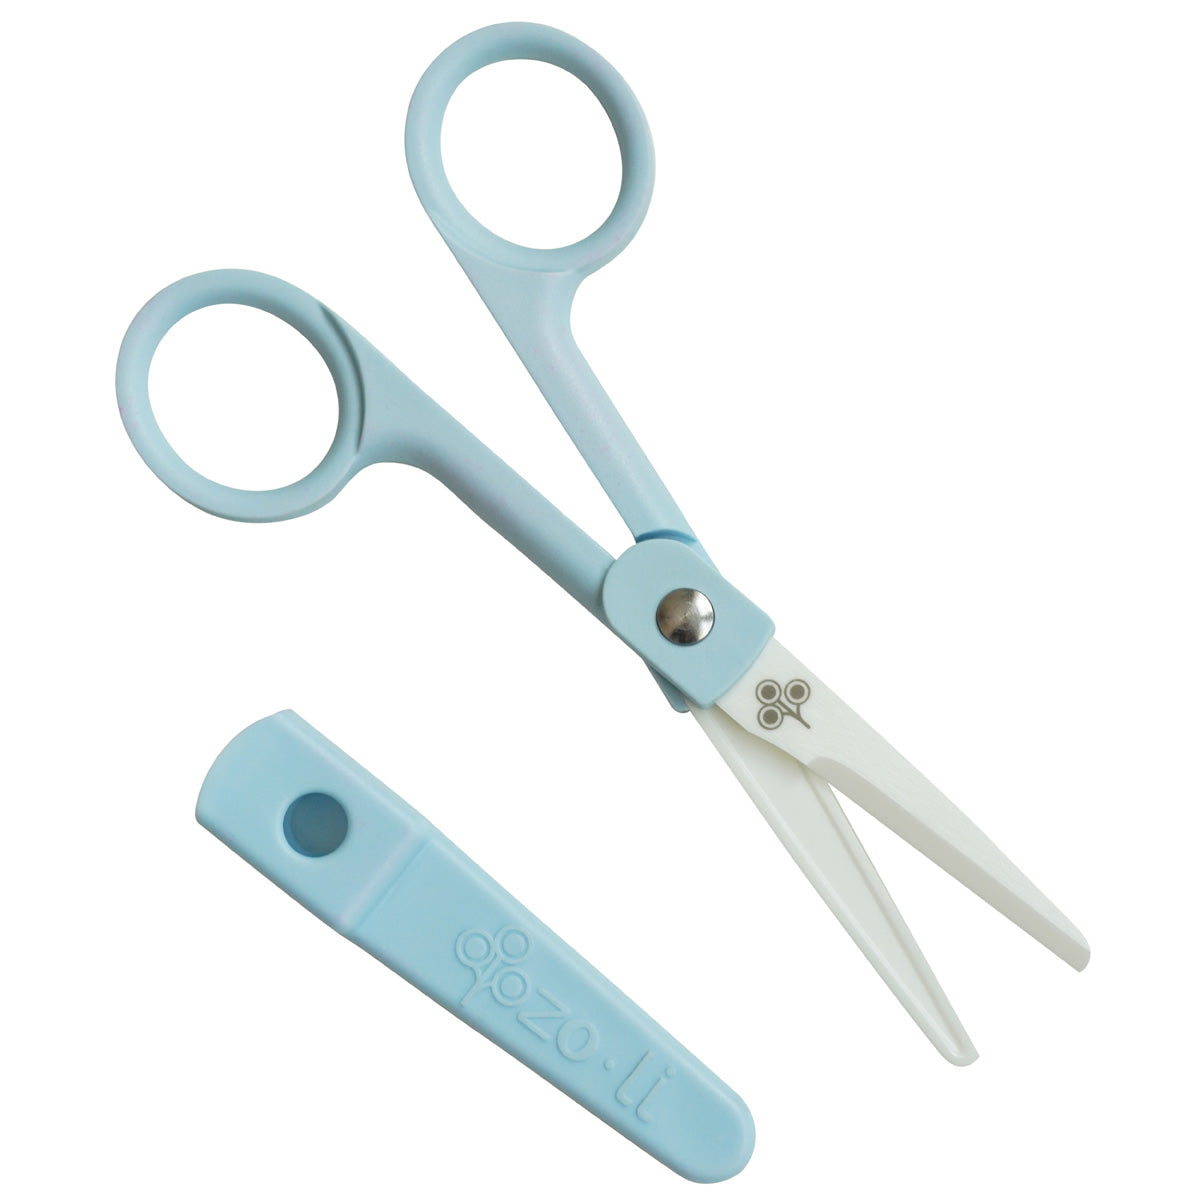 2-Pk) Little Sprout Baby Food Scissors with Covers Stainless Steel